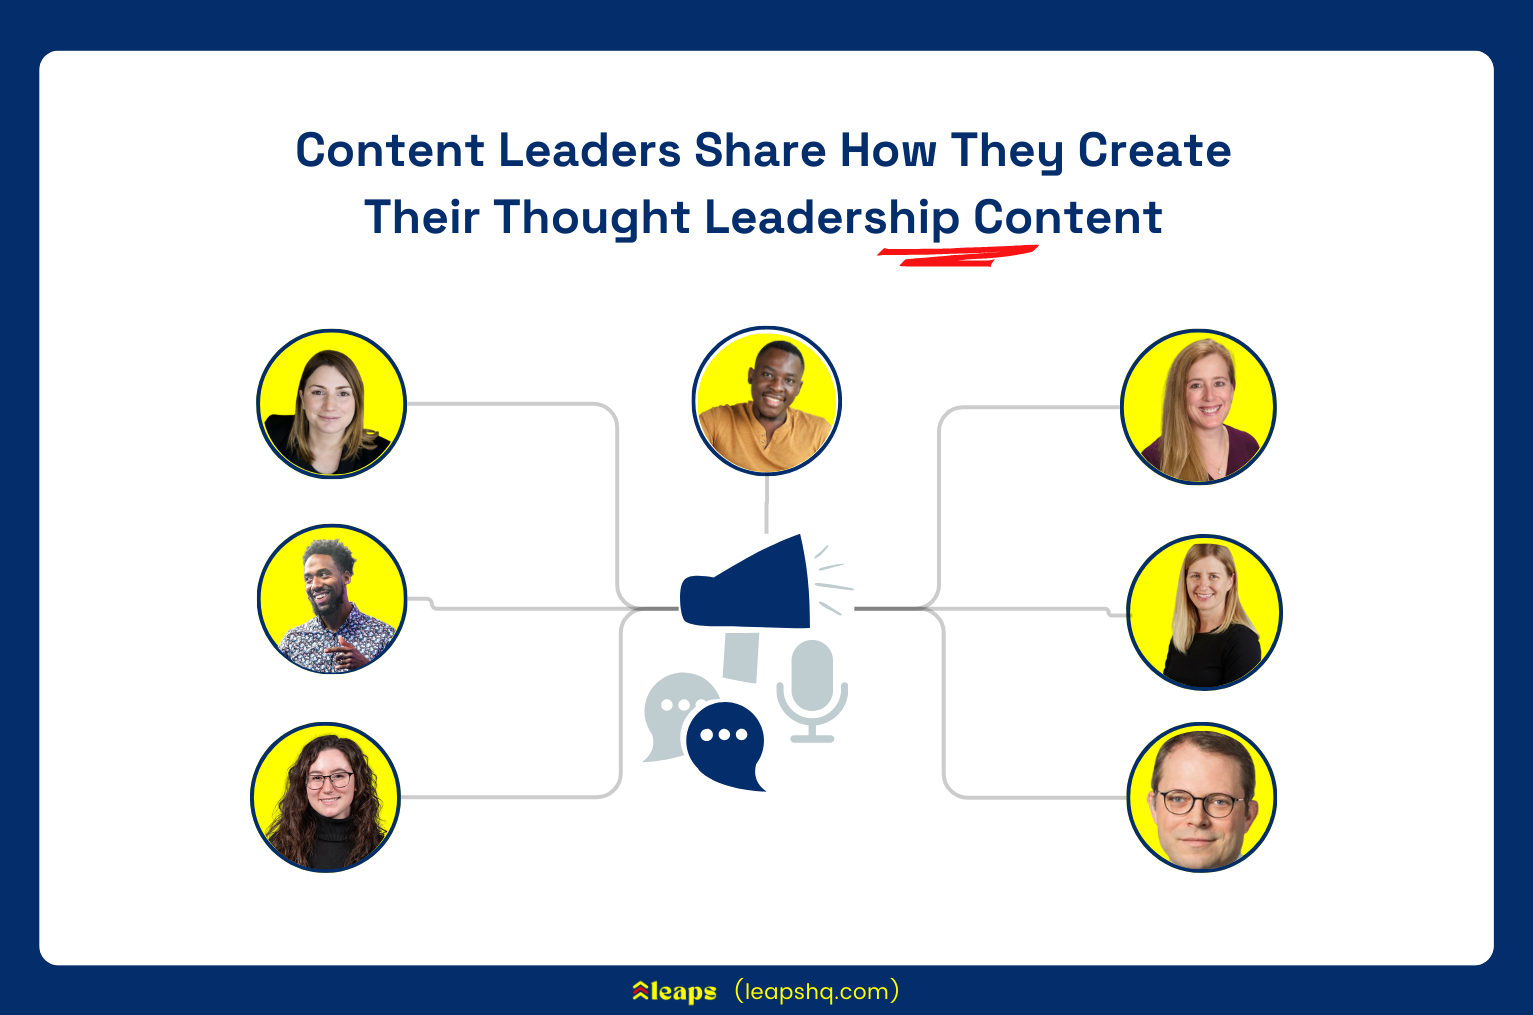 6 Thought Leadership Content Best Practices (Tips From Experts)